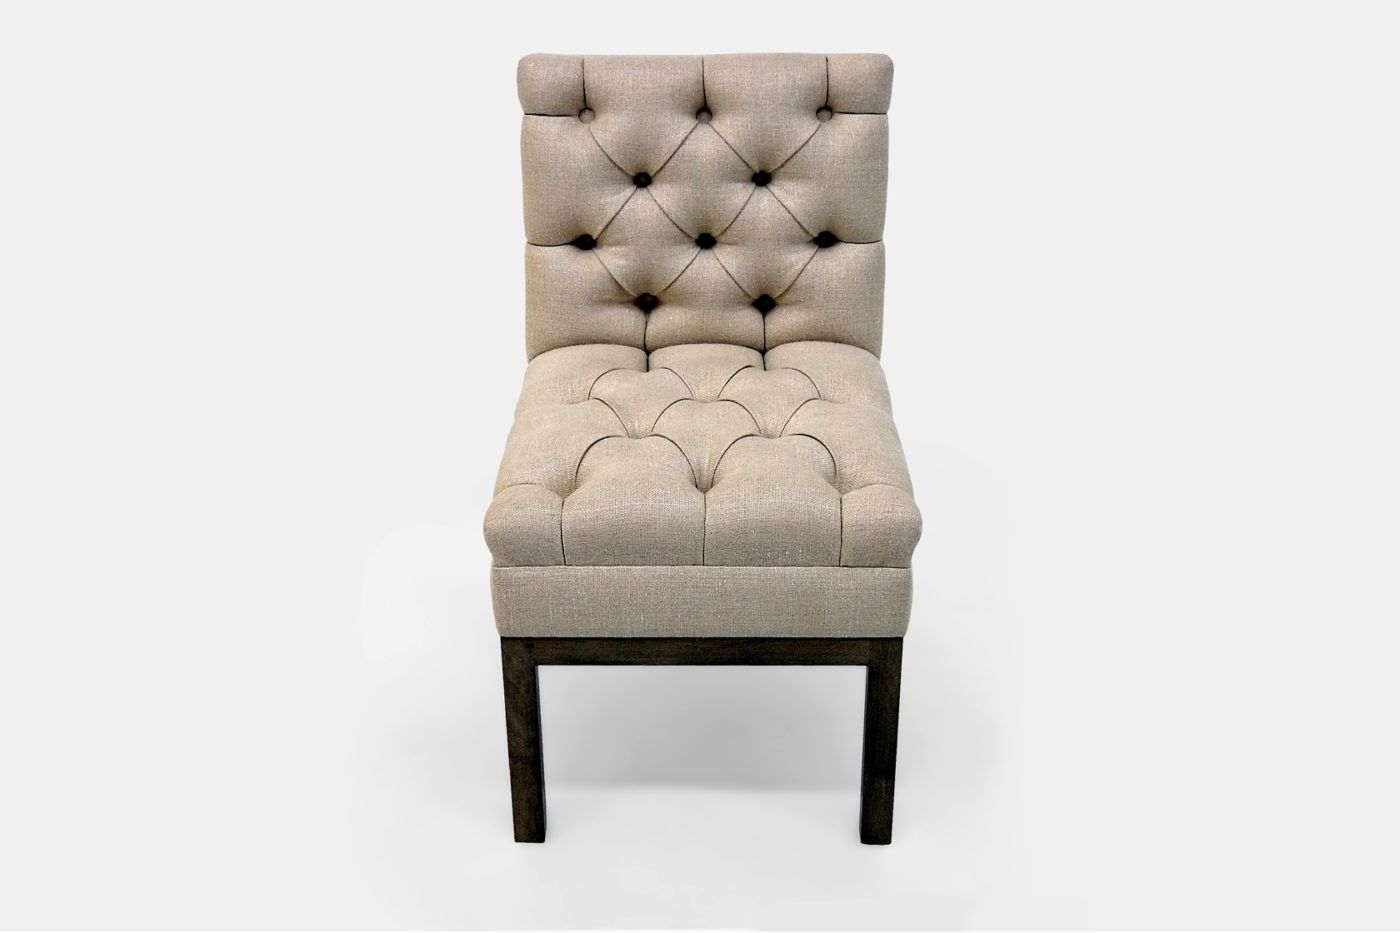 Ranger Side Chairs For Most Recent Tufted Dining Chair – Room (View 7 of 20)